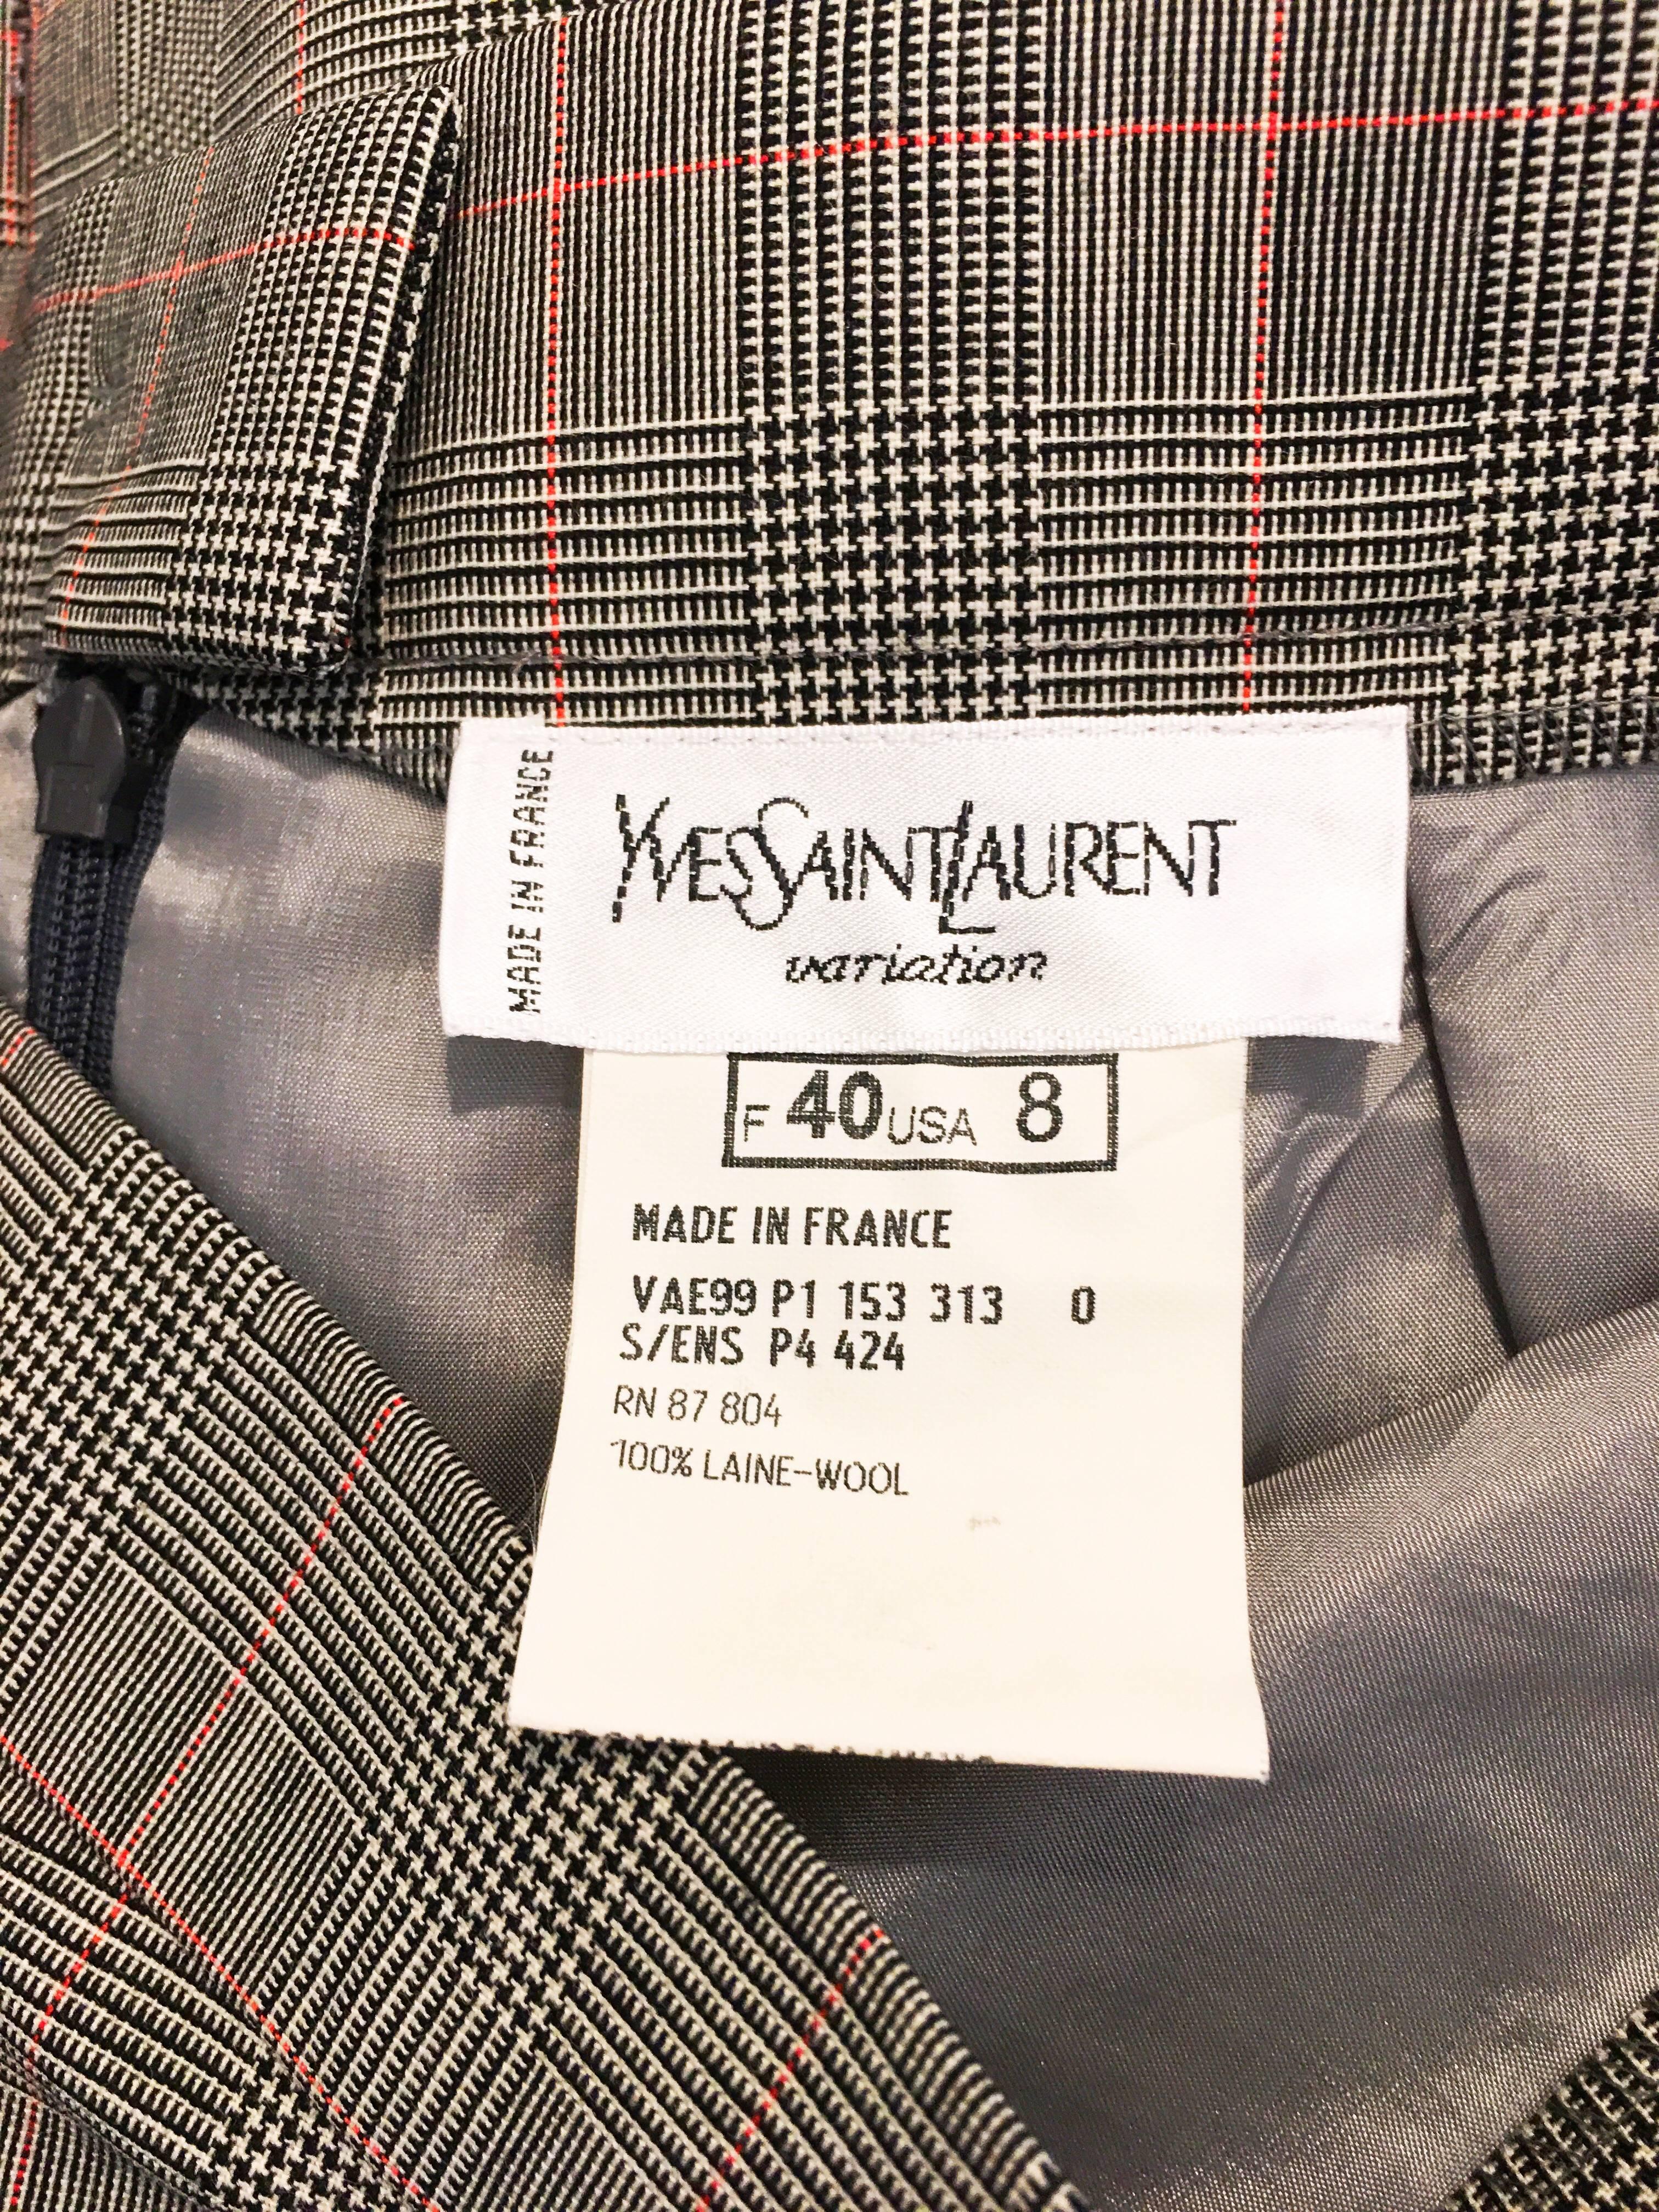 Yves St. Laurent Plaid Mini Houndstooth Mini Skirt In Excellent Condition For Sale In Brooklyn, NY